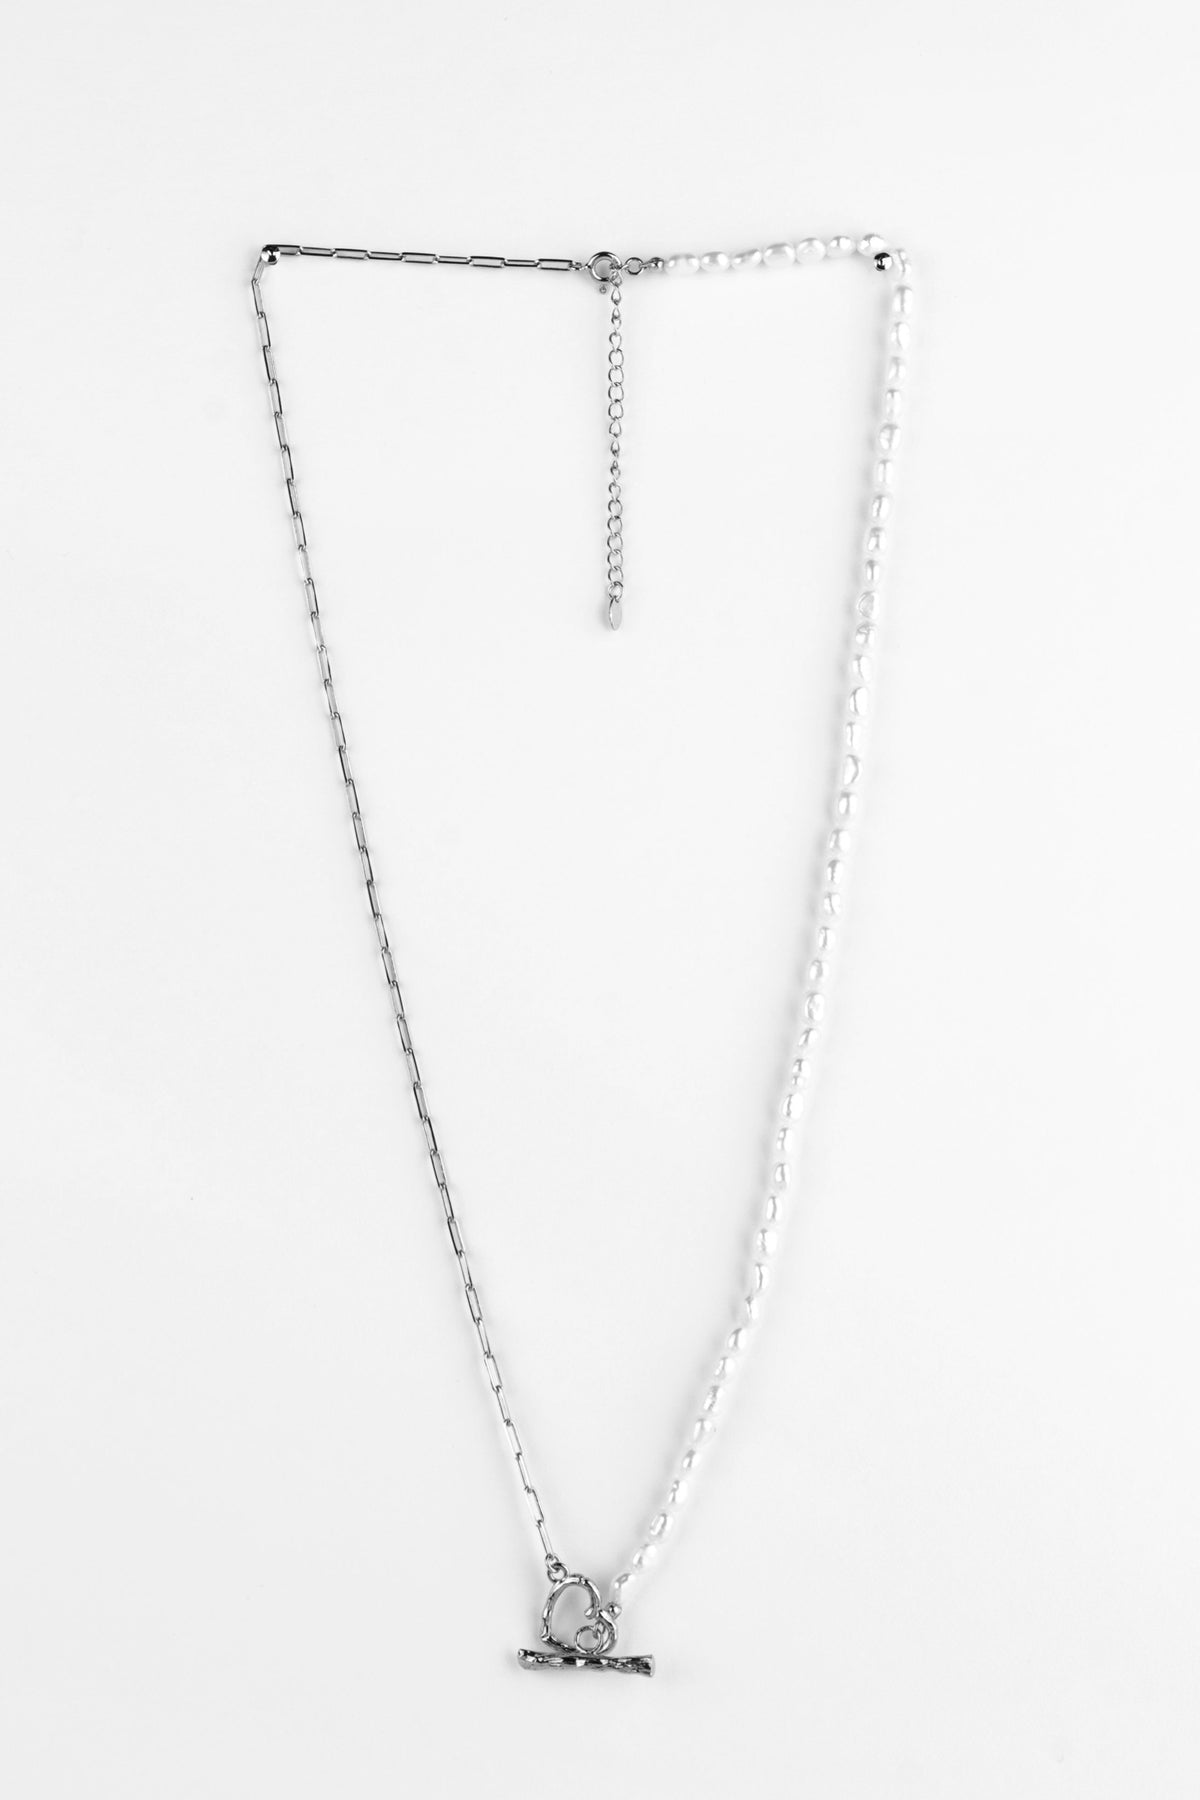 Half Silver Chain/Pearls Fob Necklace